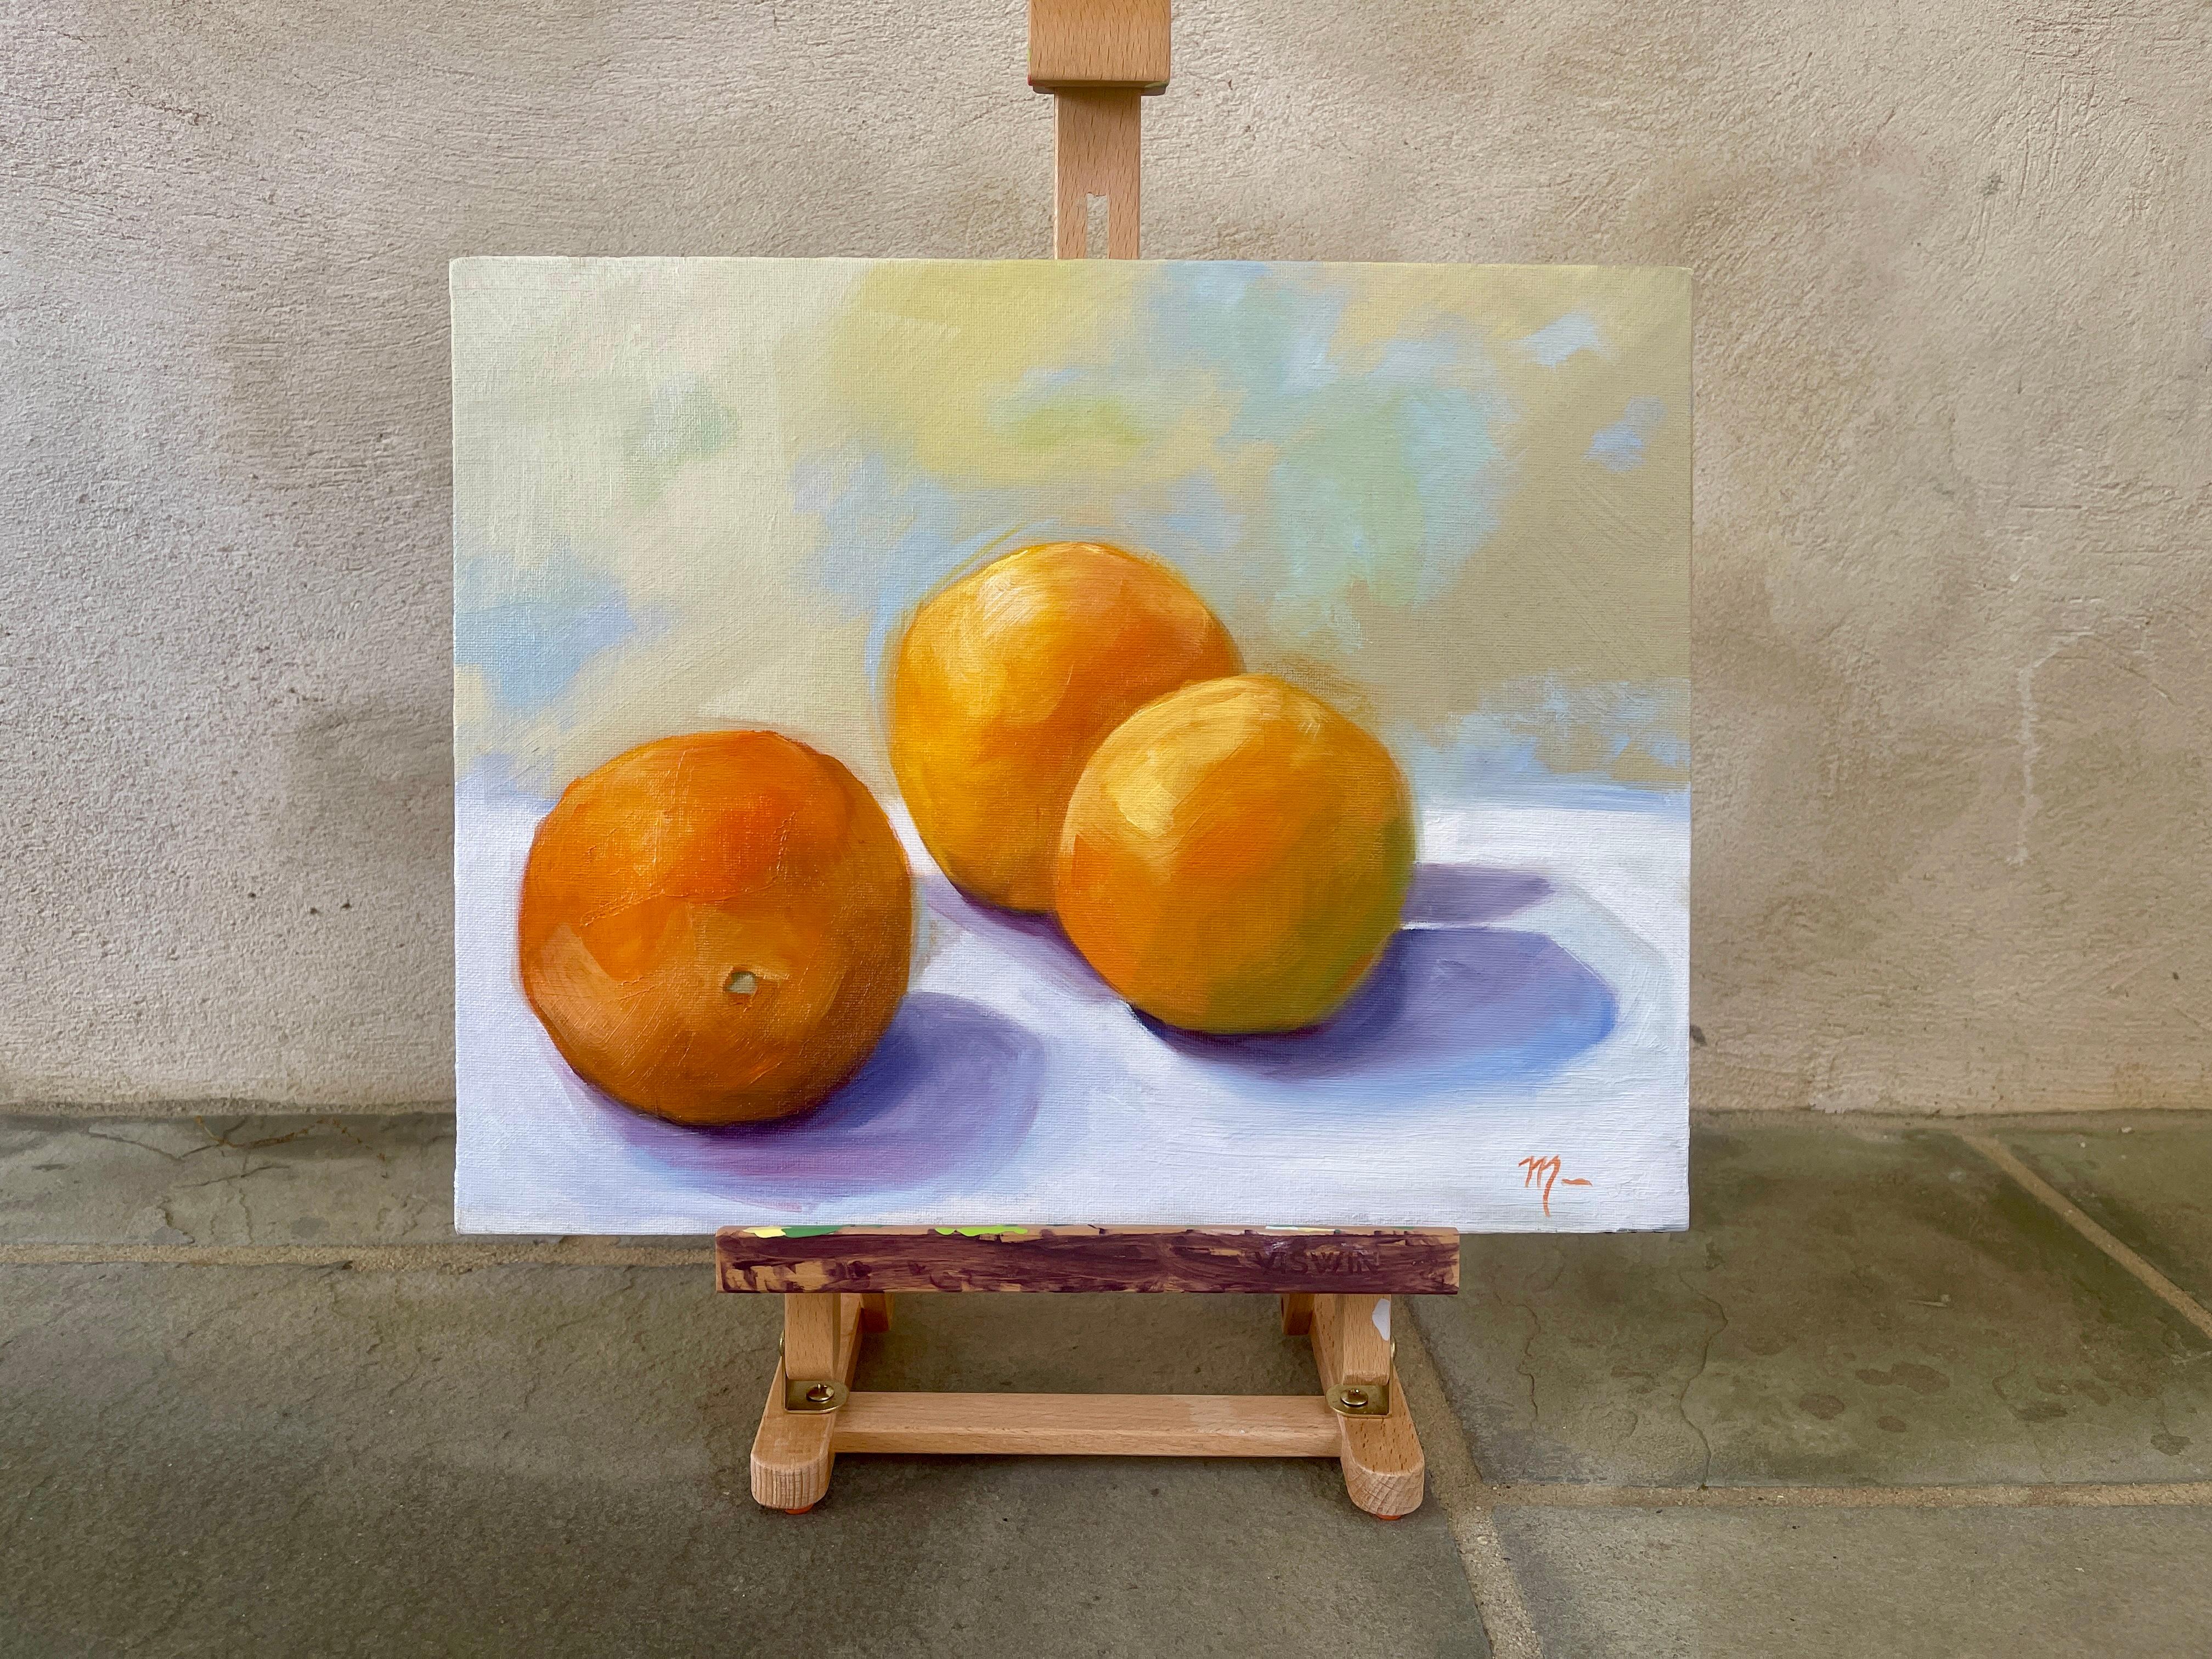 <p>Artist Comments<br>Three citrus fruits cast lavender shadows in this still life. The balance between form and delicate light with the soft colors evokes a tranquil atmosphere. The painting captures the beauty within simplicity.</p><br/><p>About